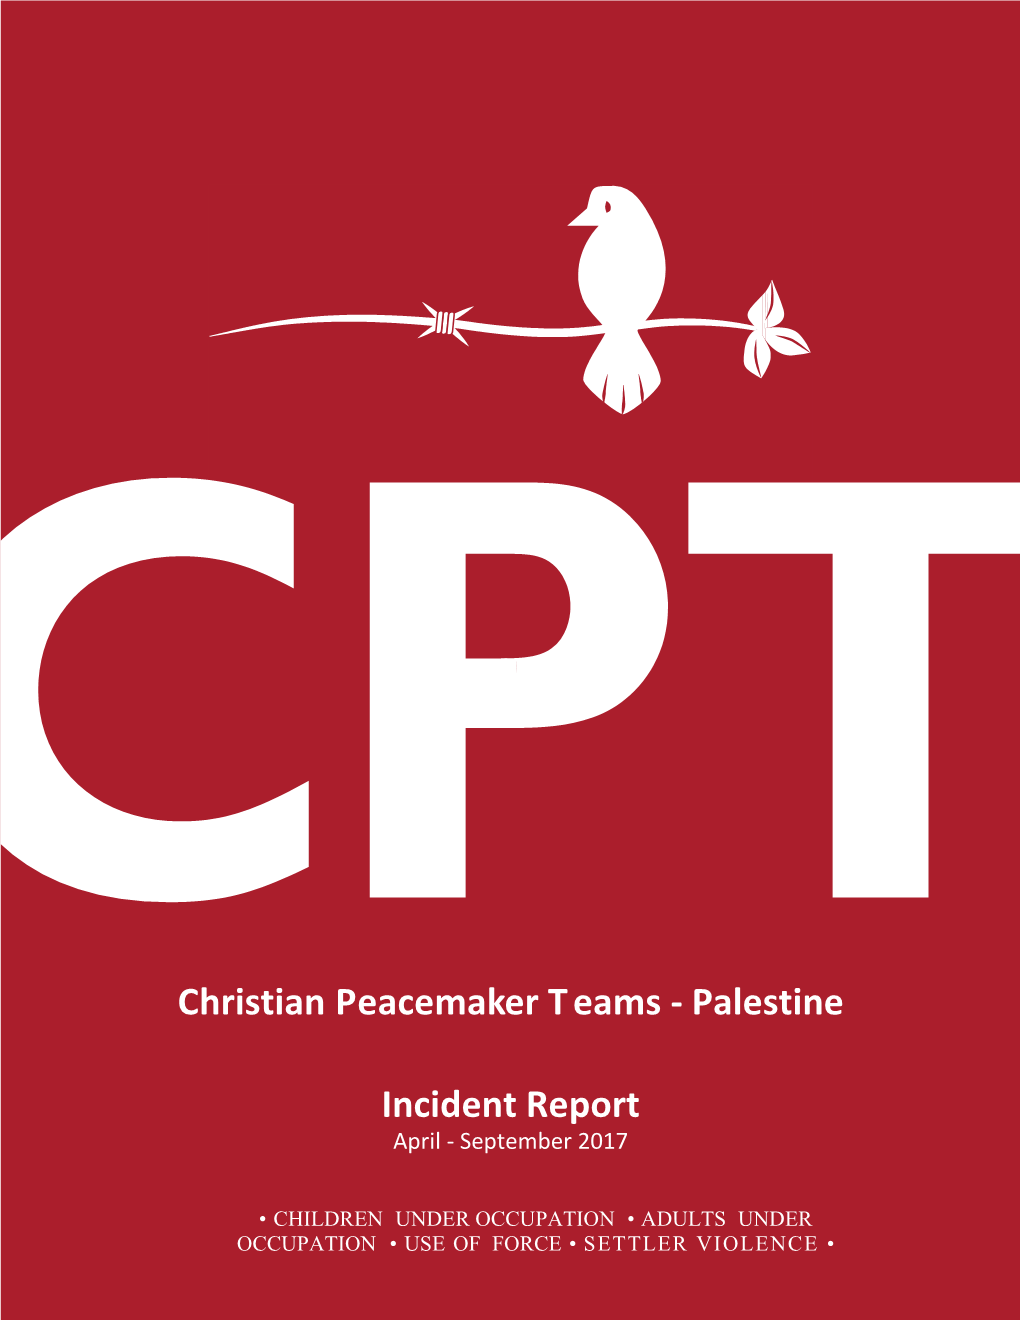 Christian Peacemaker T Eams - Palestine